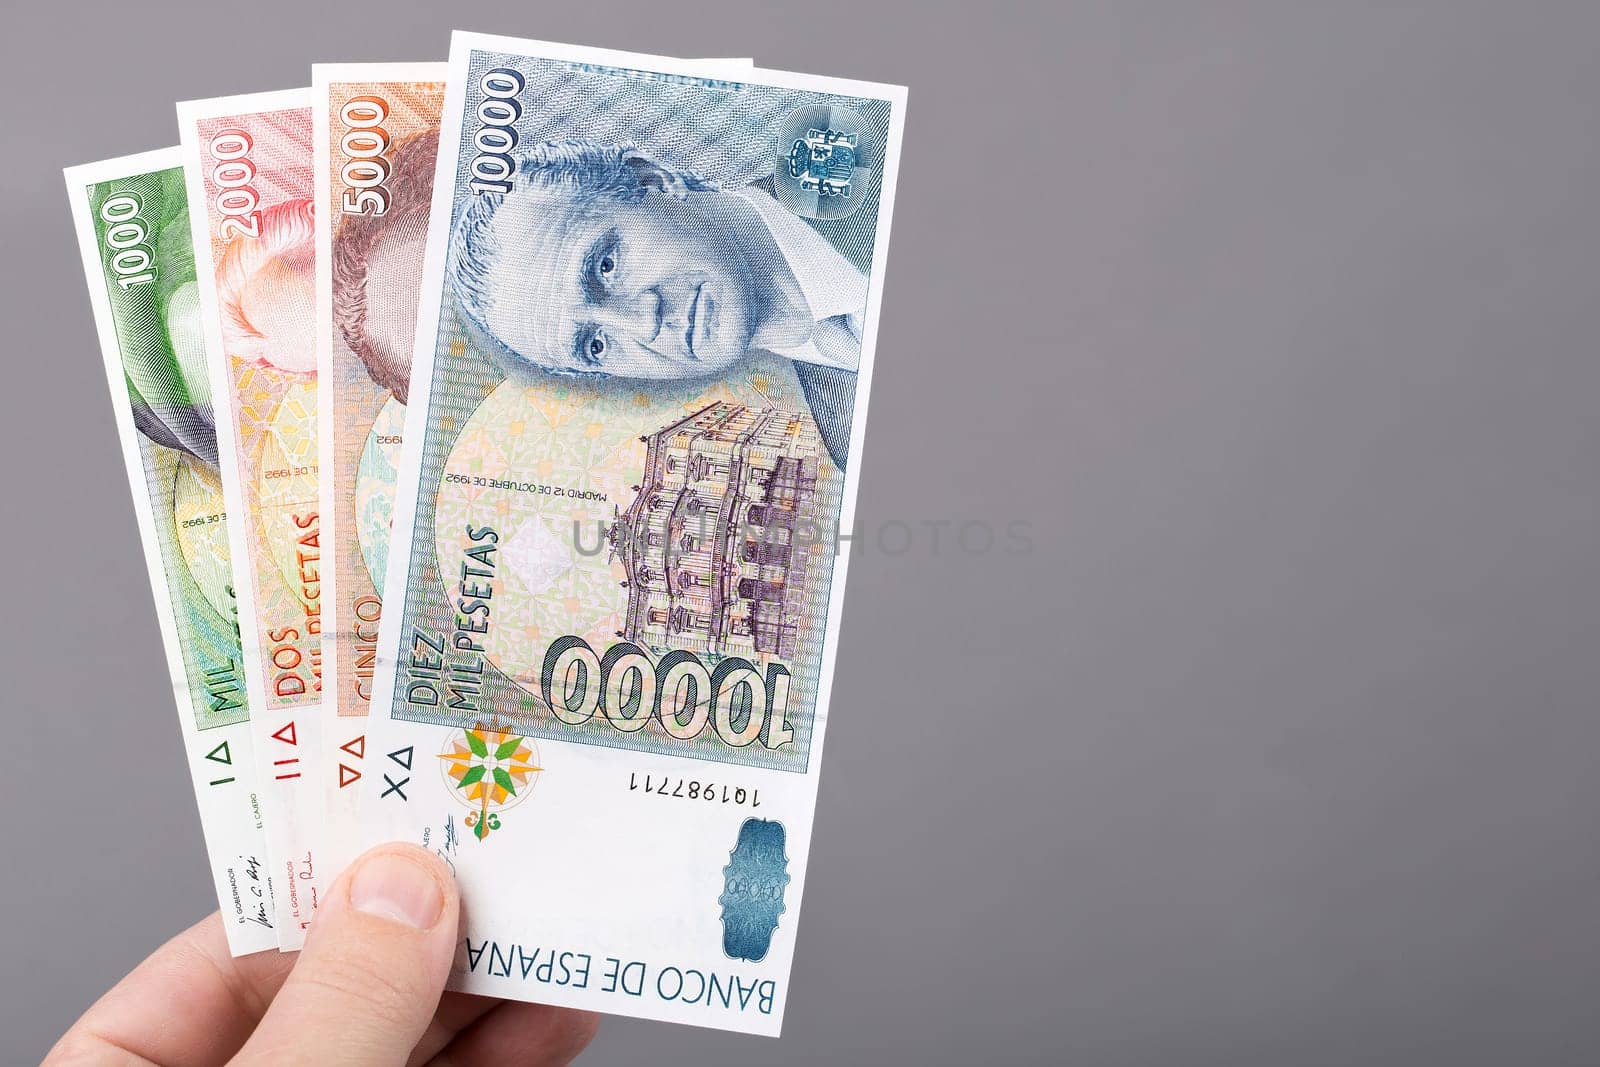 Spanish money in the hand on a gray background by johan10